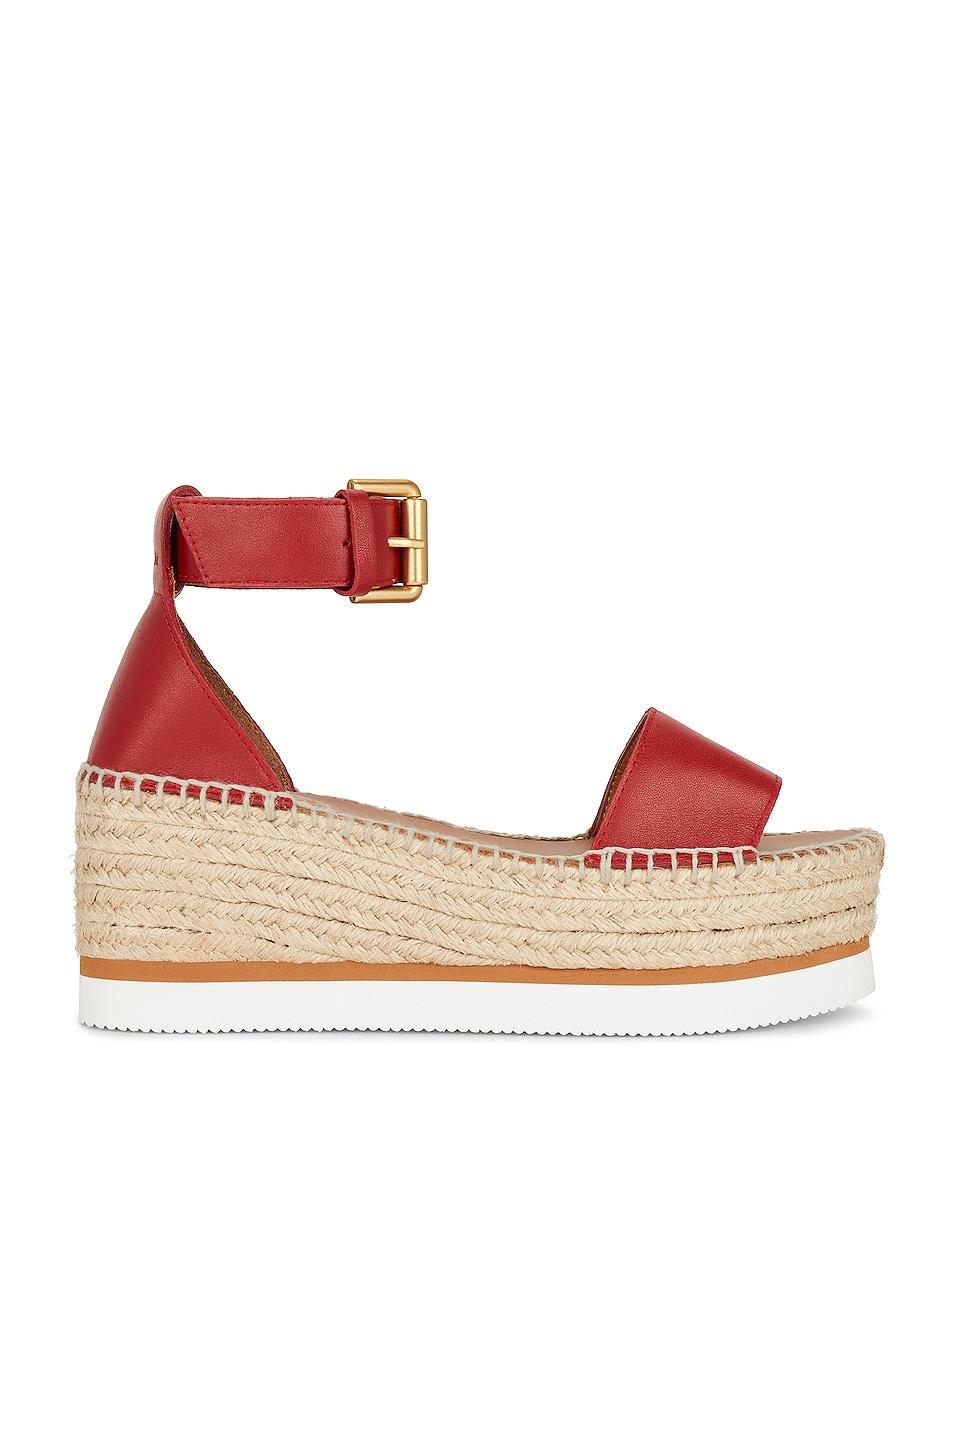 See By Chloé Leather Glyn Platform Sandal in Dark Red (Red) | Lyst